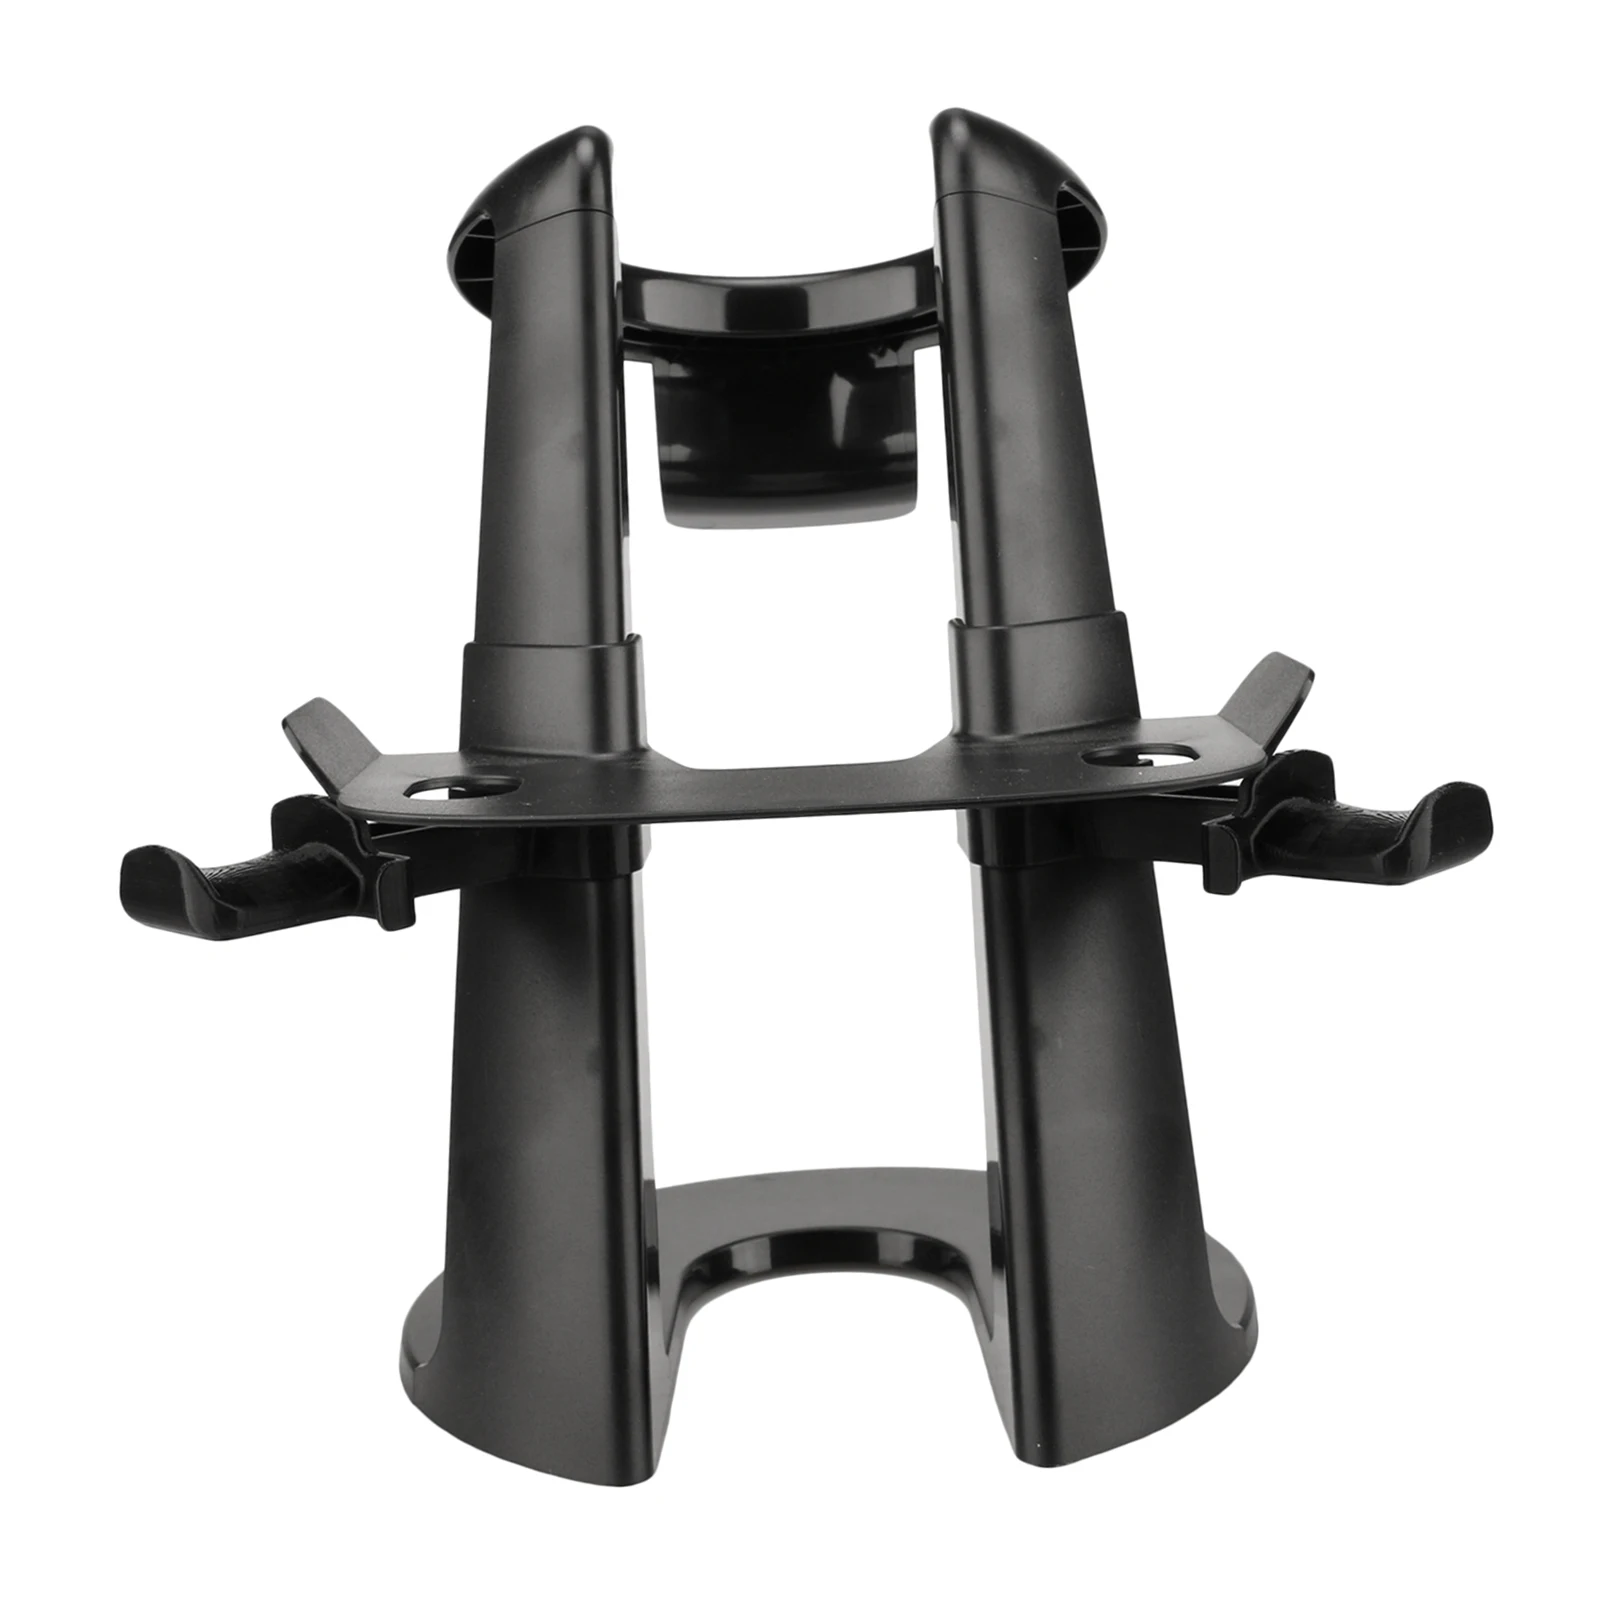 VR Stand Headset Display Holder Mount Station for  Rift S Quest 2 Stable Base